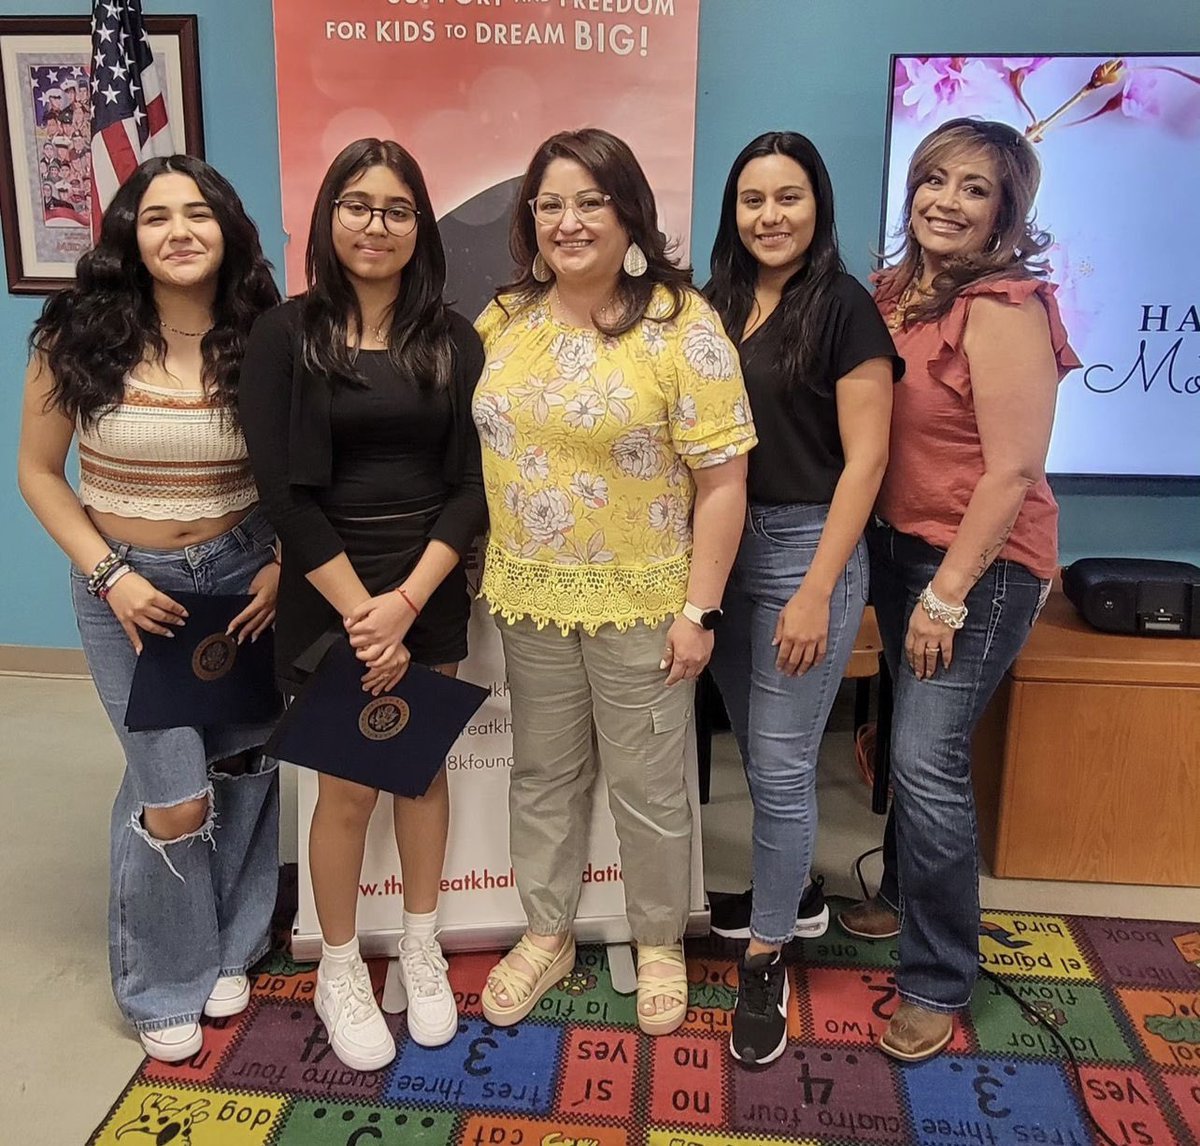 🌟 Hats off to our sophomore Highlanders, Vivinee Bojorquez and Jeimmy Correa, for seizing victory in the Khalid Foundation Mother’s Day essay contest 📝and earning a prestigious certificate of recognition from Congresswoman Escobar. 🎉 #THEDISTRICT is proud of your achievement!